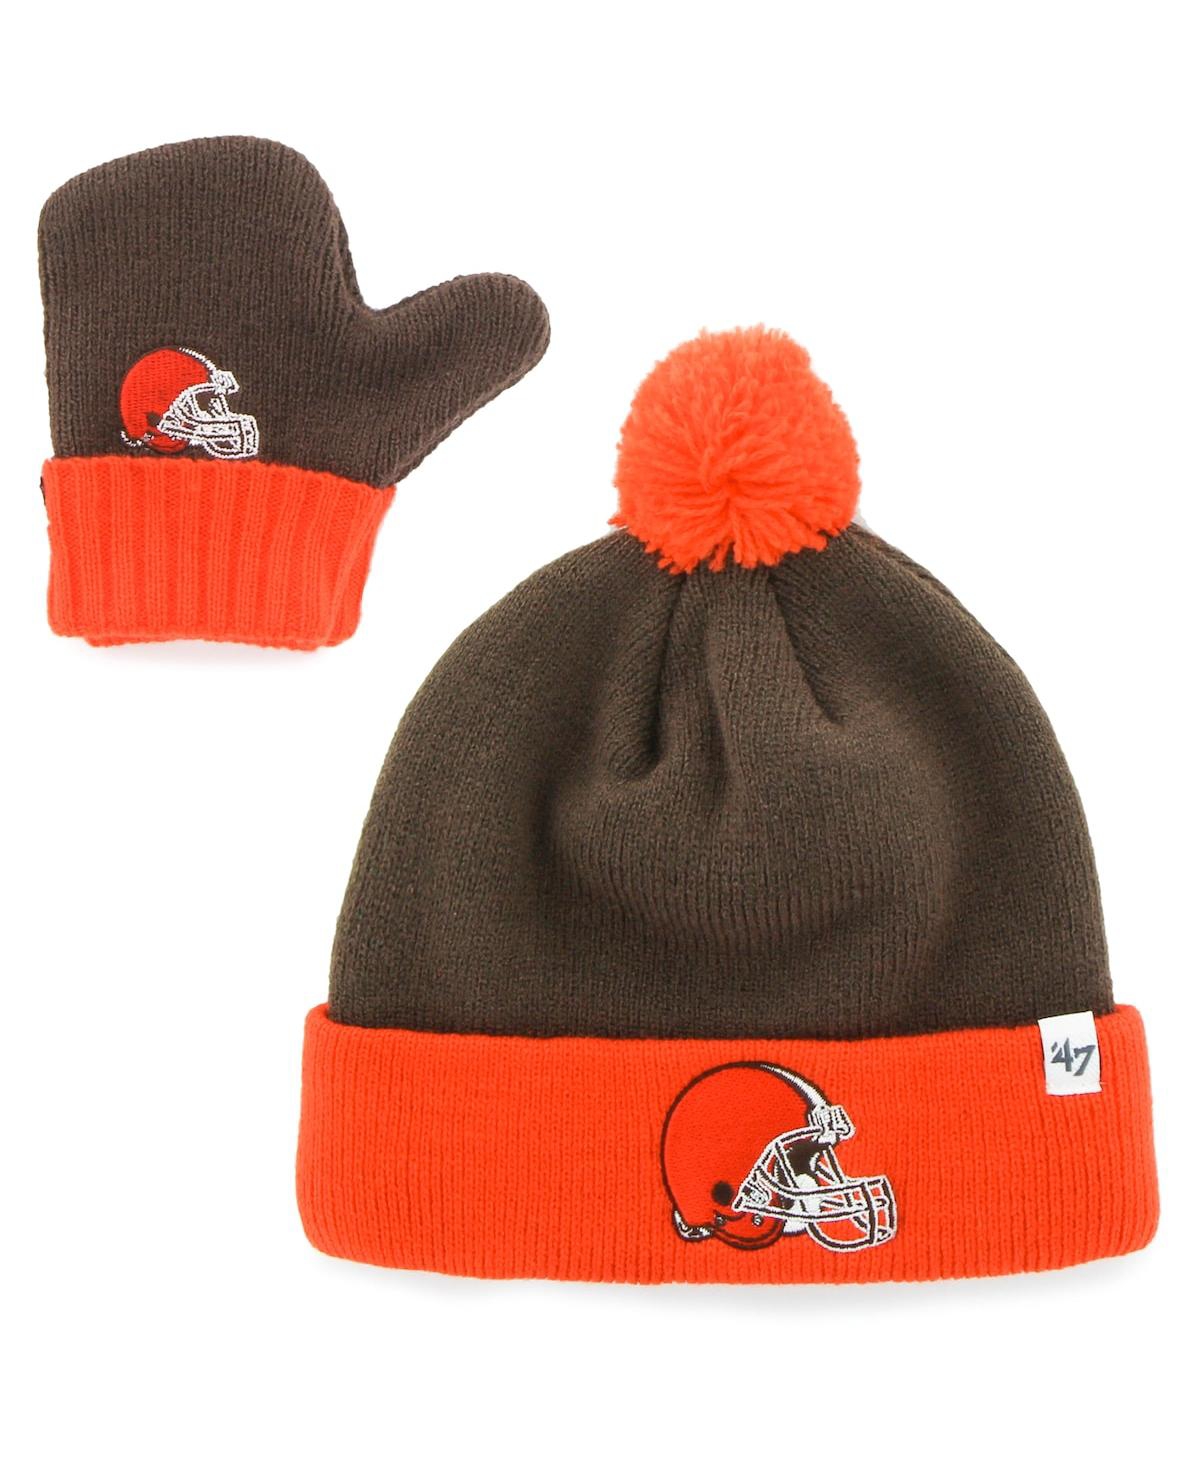 47 BRAND TODDLER UNISEX BROWN AND ORANGE CLEVELAND BROWNS BAM BAM CUFFED KNIT HAT WITH POM AND MITTENS SET